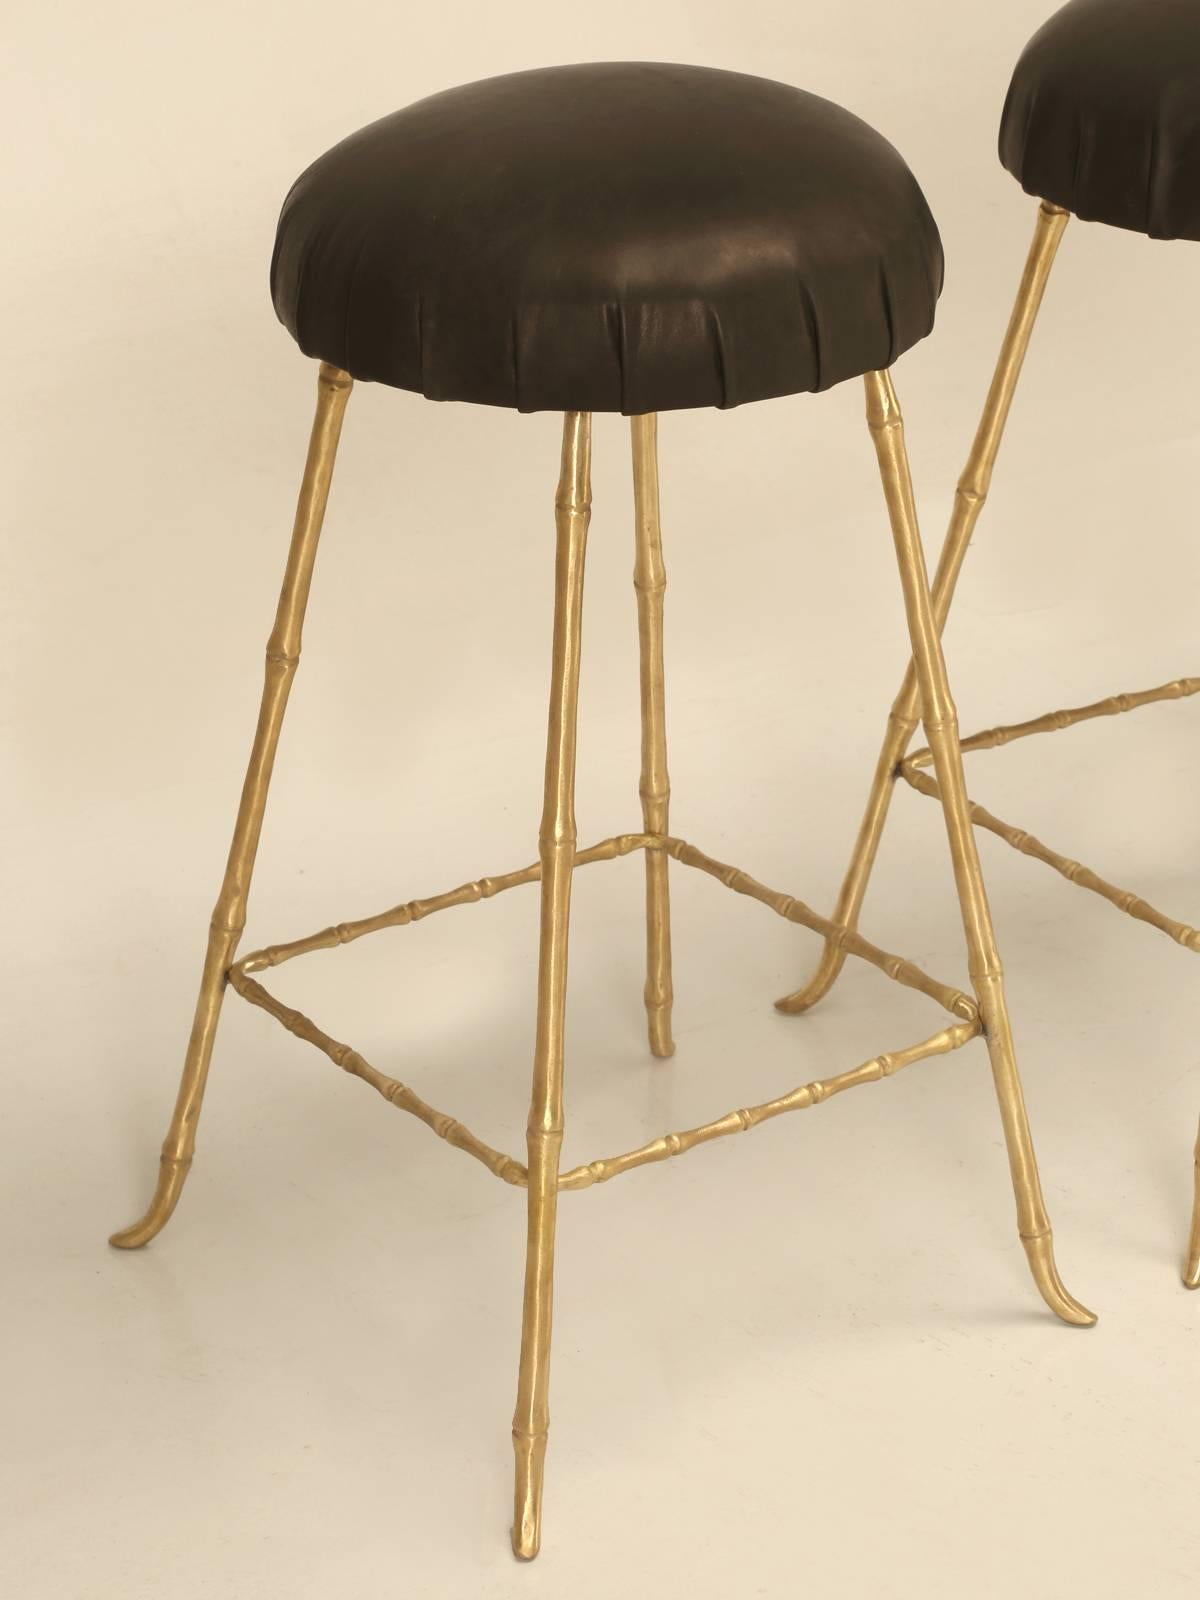 Contemporary Polished Solid Brass Counter Stools in a Jansen Inspired Faux Bamboo Design